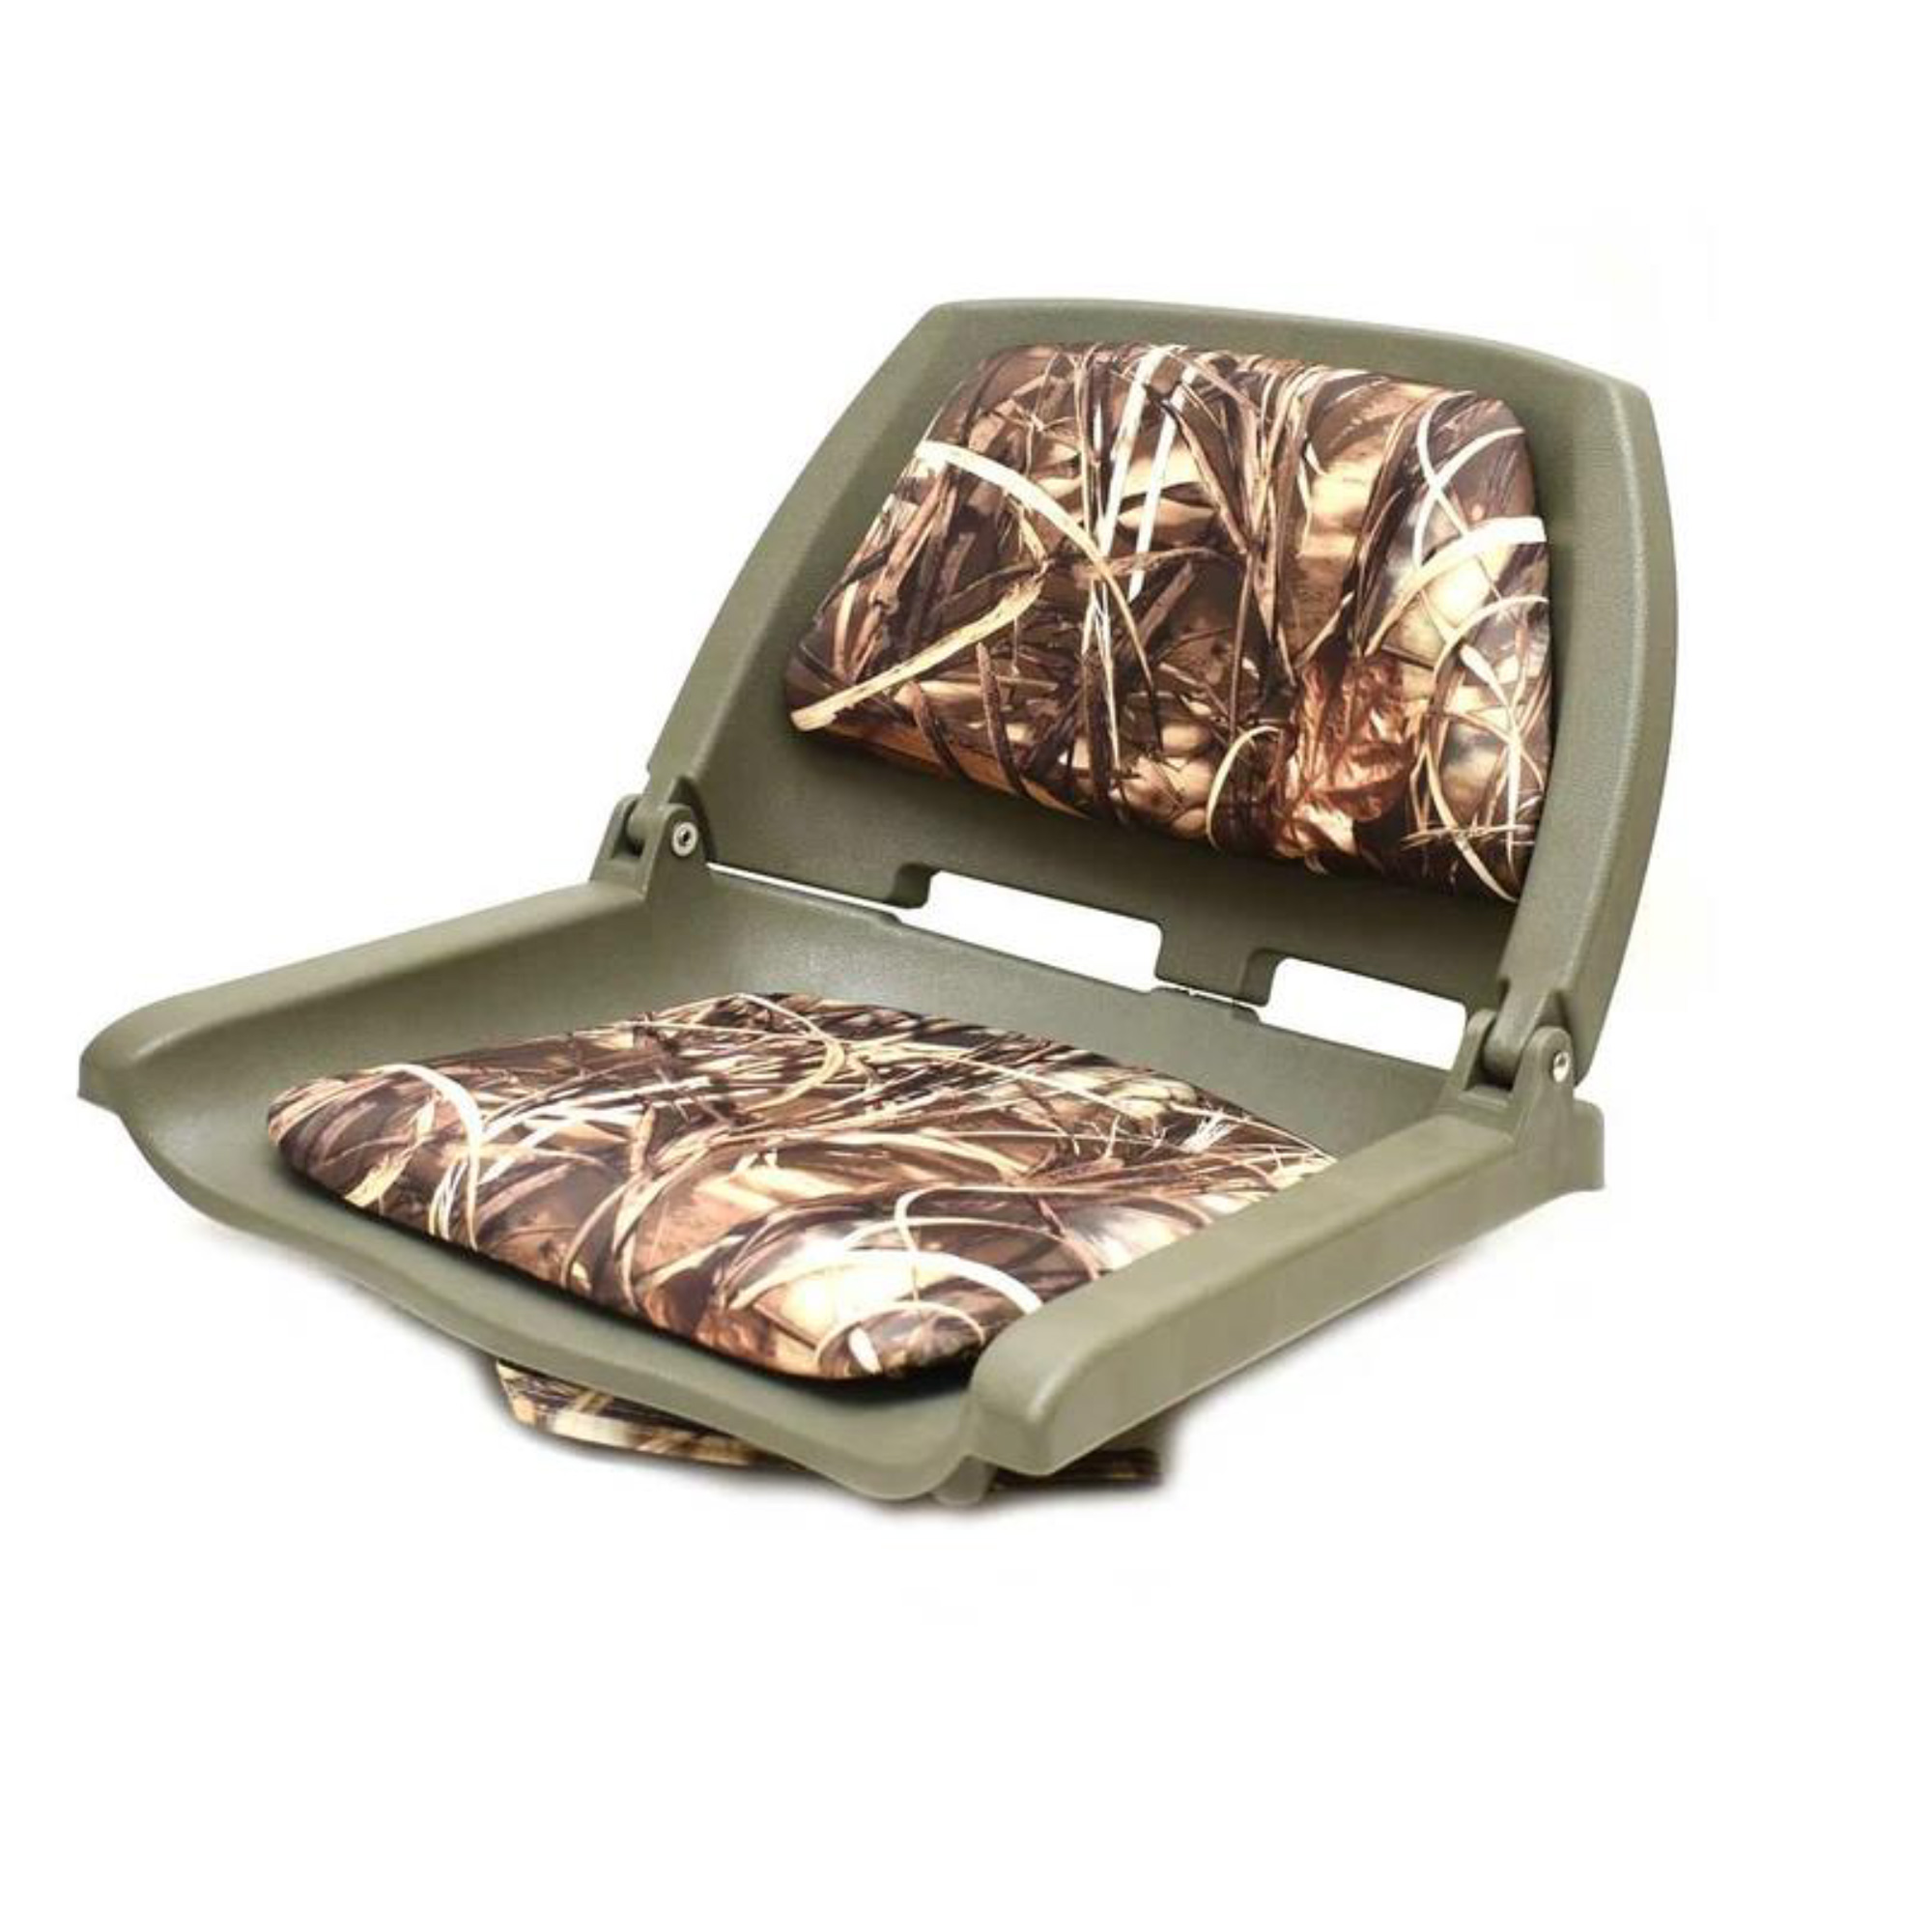 Attwood Boat Padded Flip Seat, Realtree Camouflage - Runnings